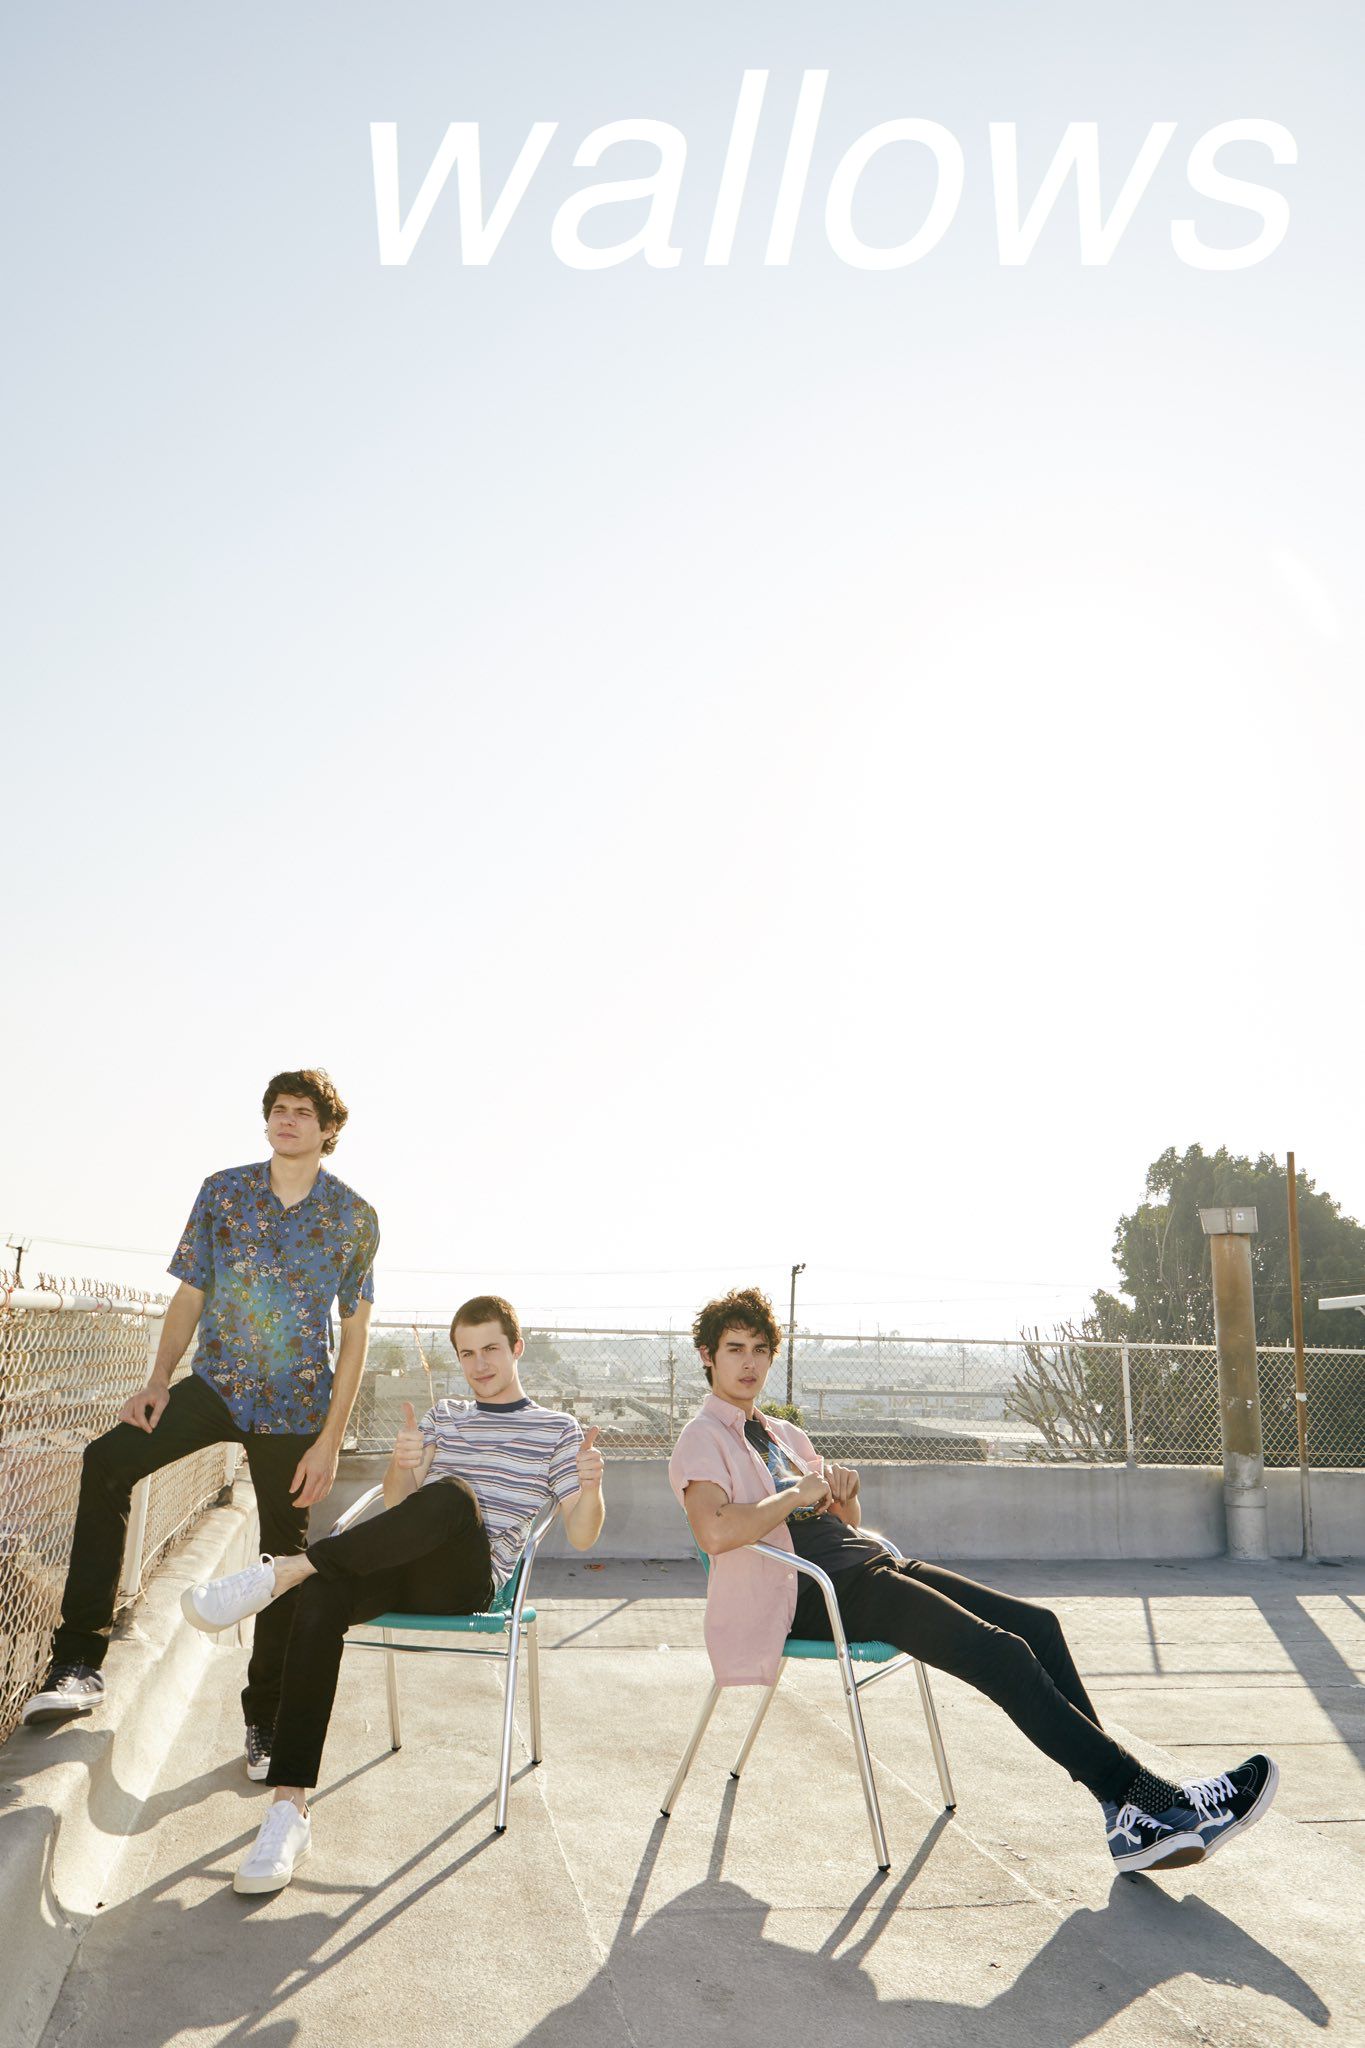 Wallows Photoshoot Wallpapers